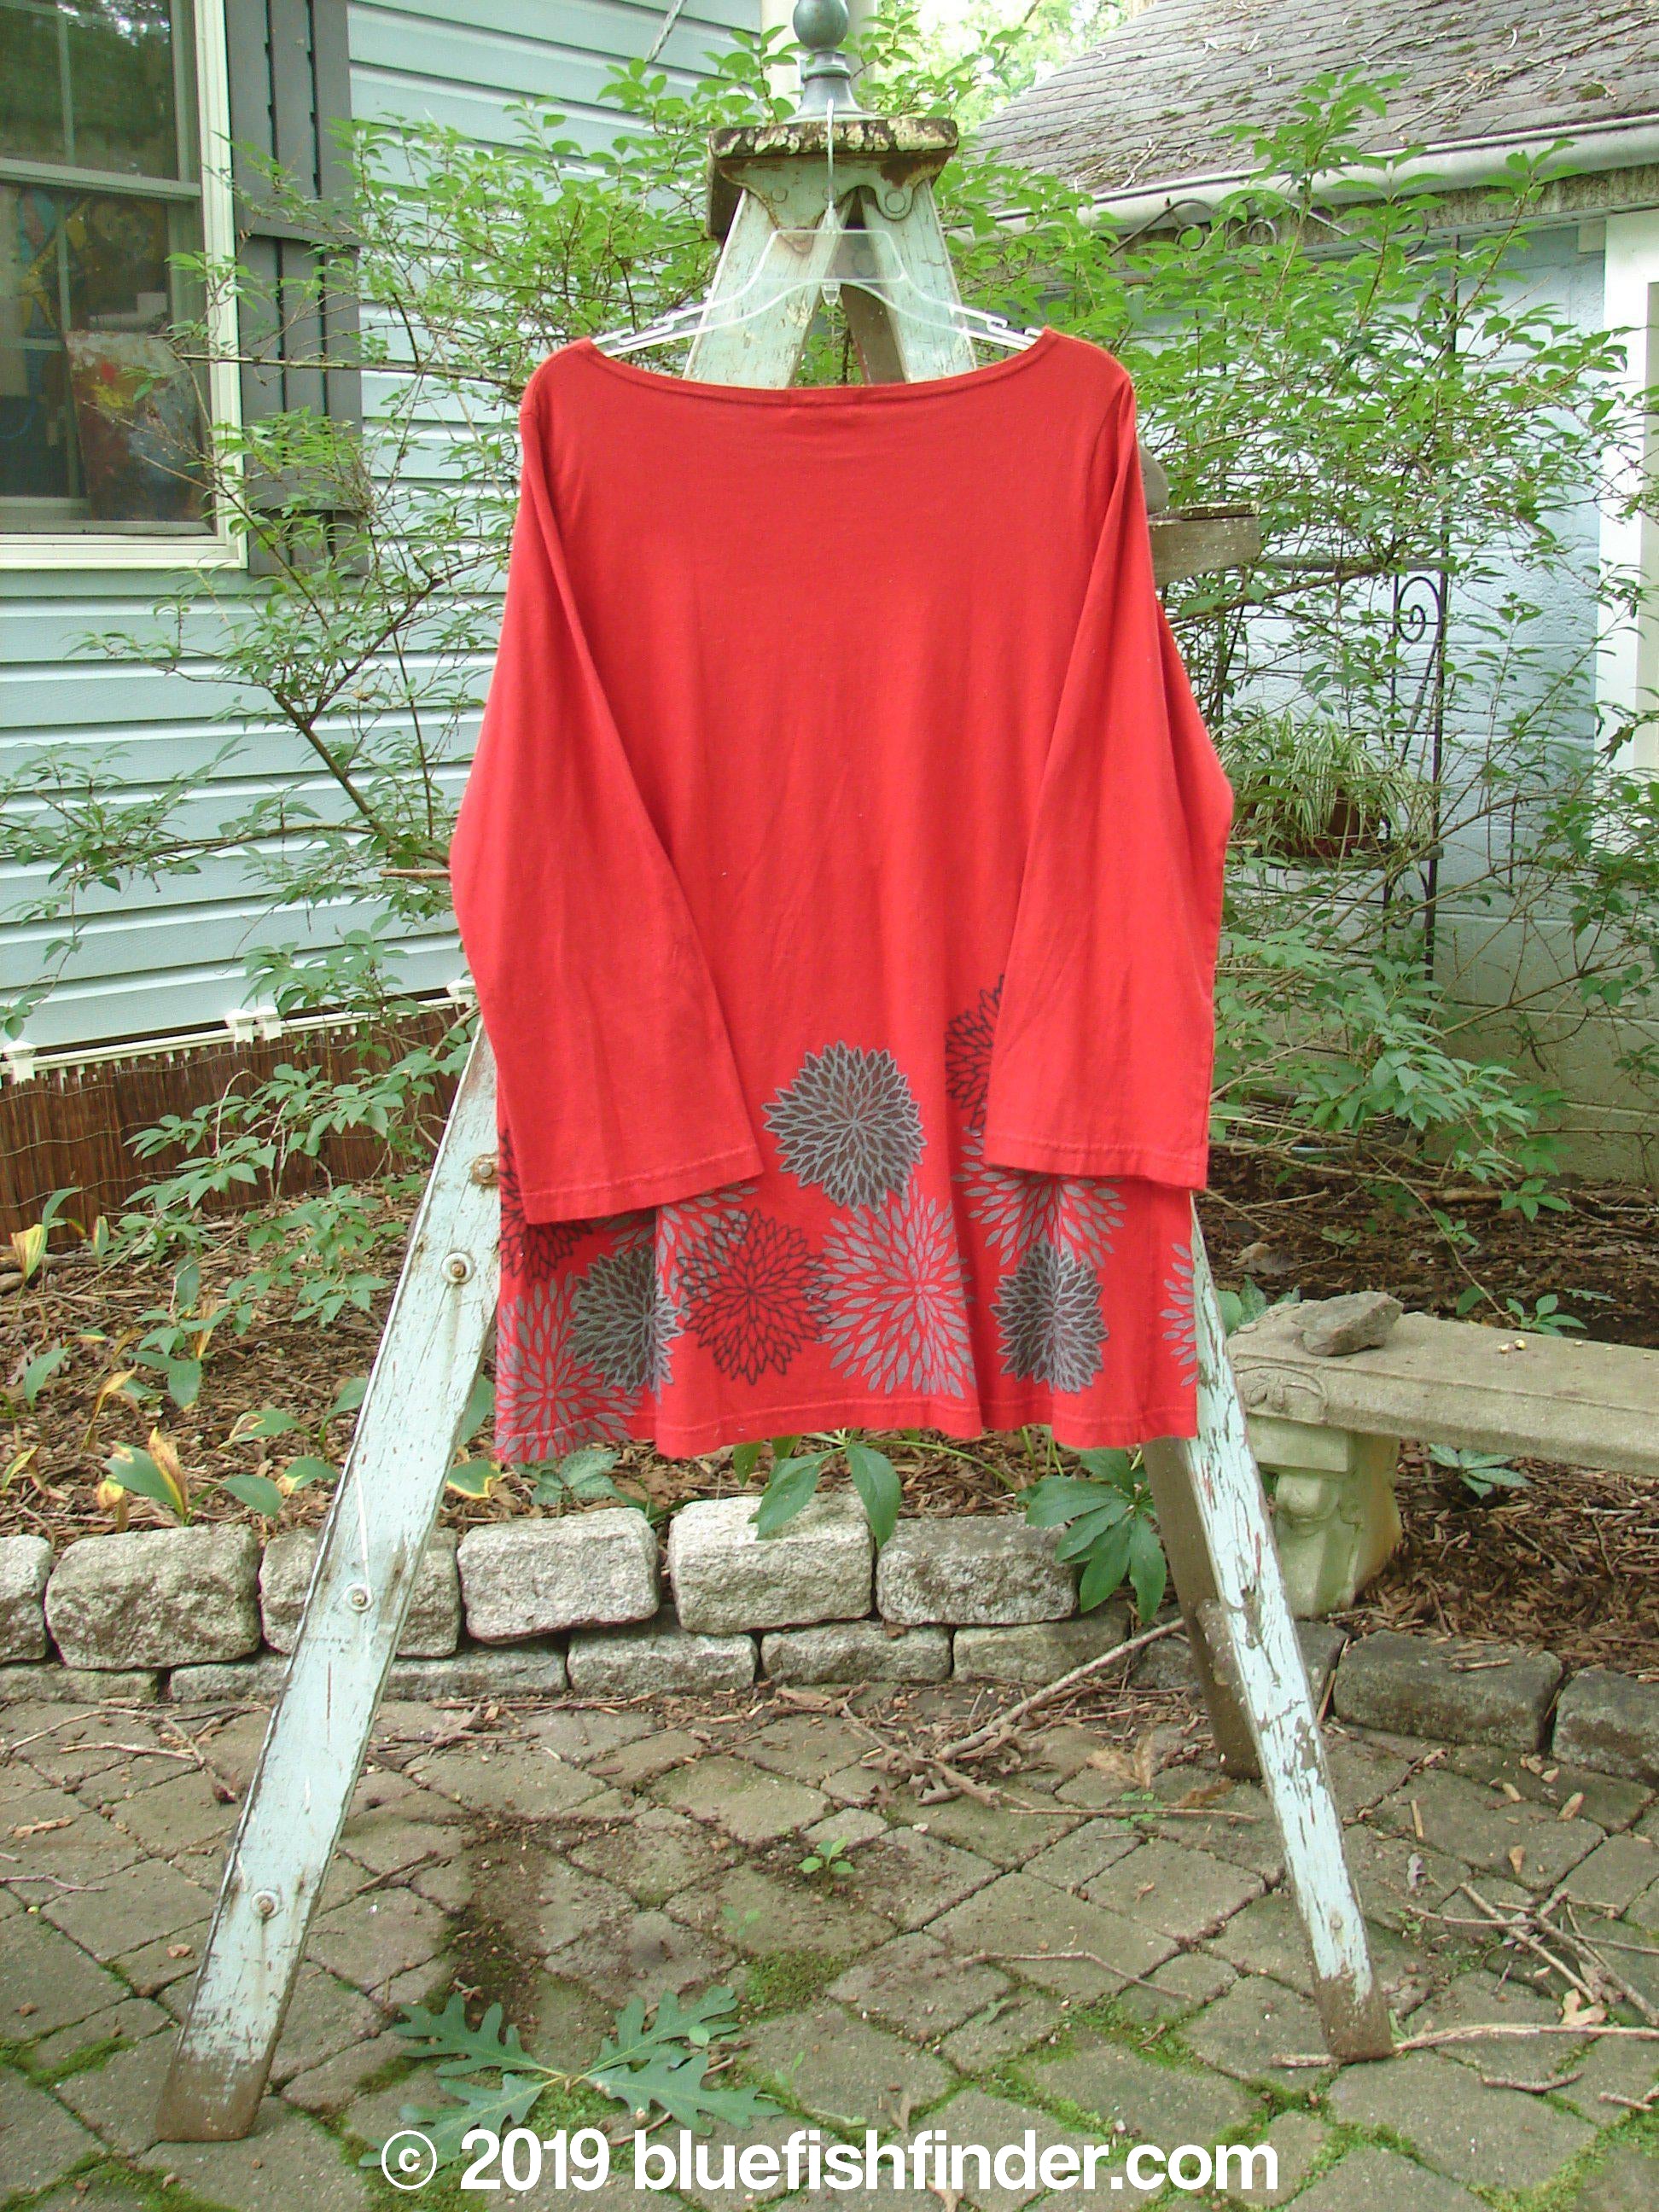 Barclay NWT Reverie Top Chrysanthemum Ruby Size 1: A red shirt with a beautifully painted chrysanthemum design, featuring a slight boat neckline and drop shoulders. The longer, A-line shape adds a flattering touch. Made from mid-weight organic cotton.